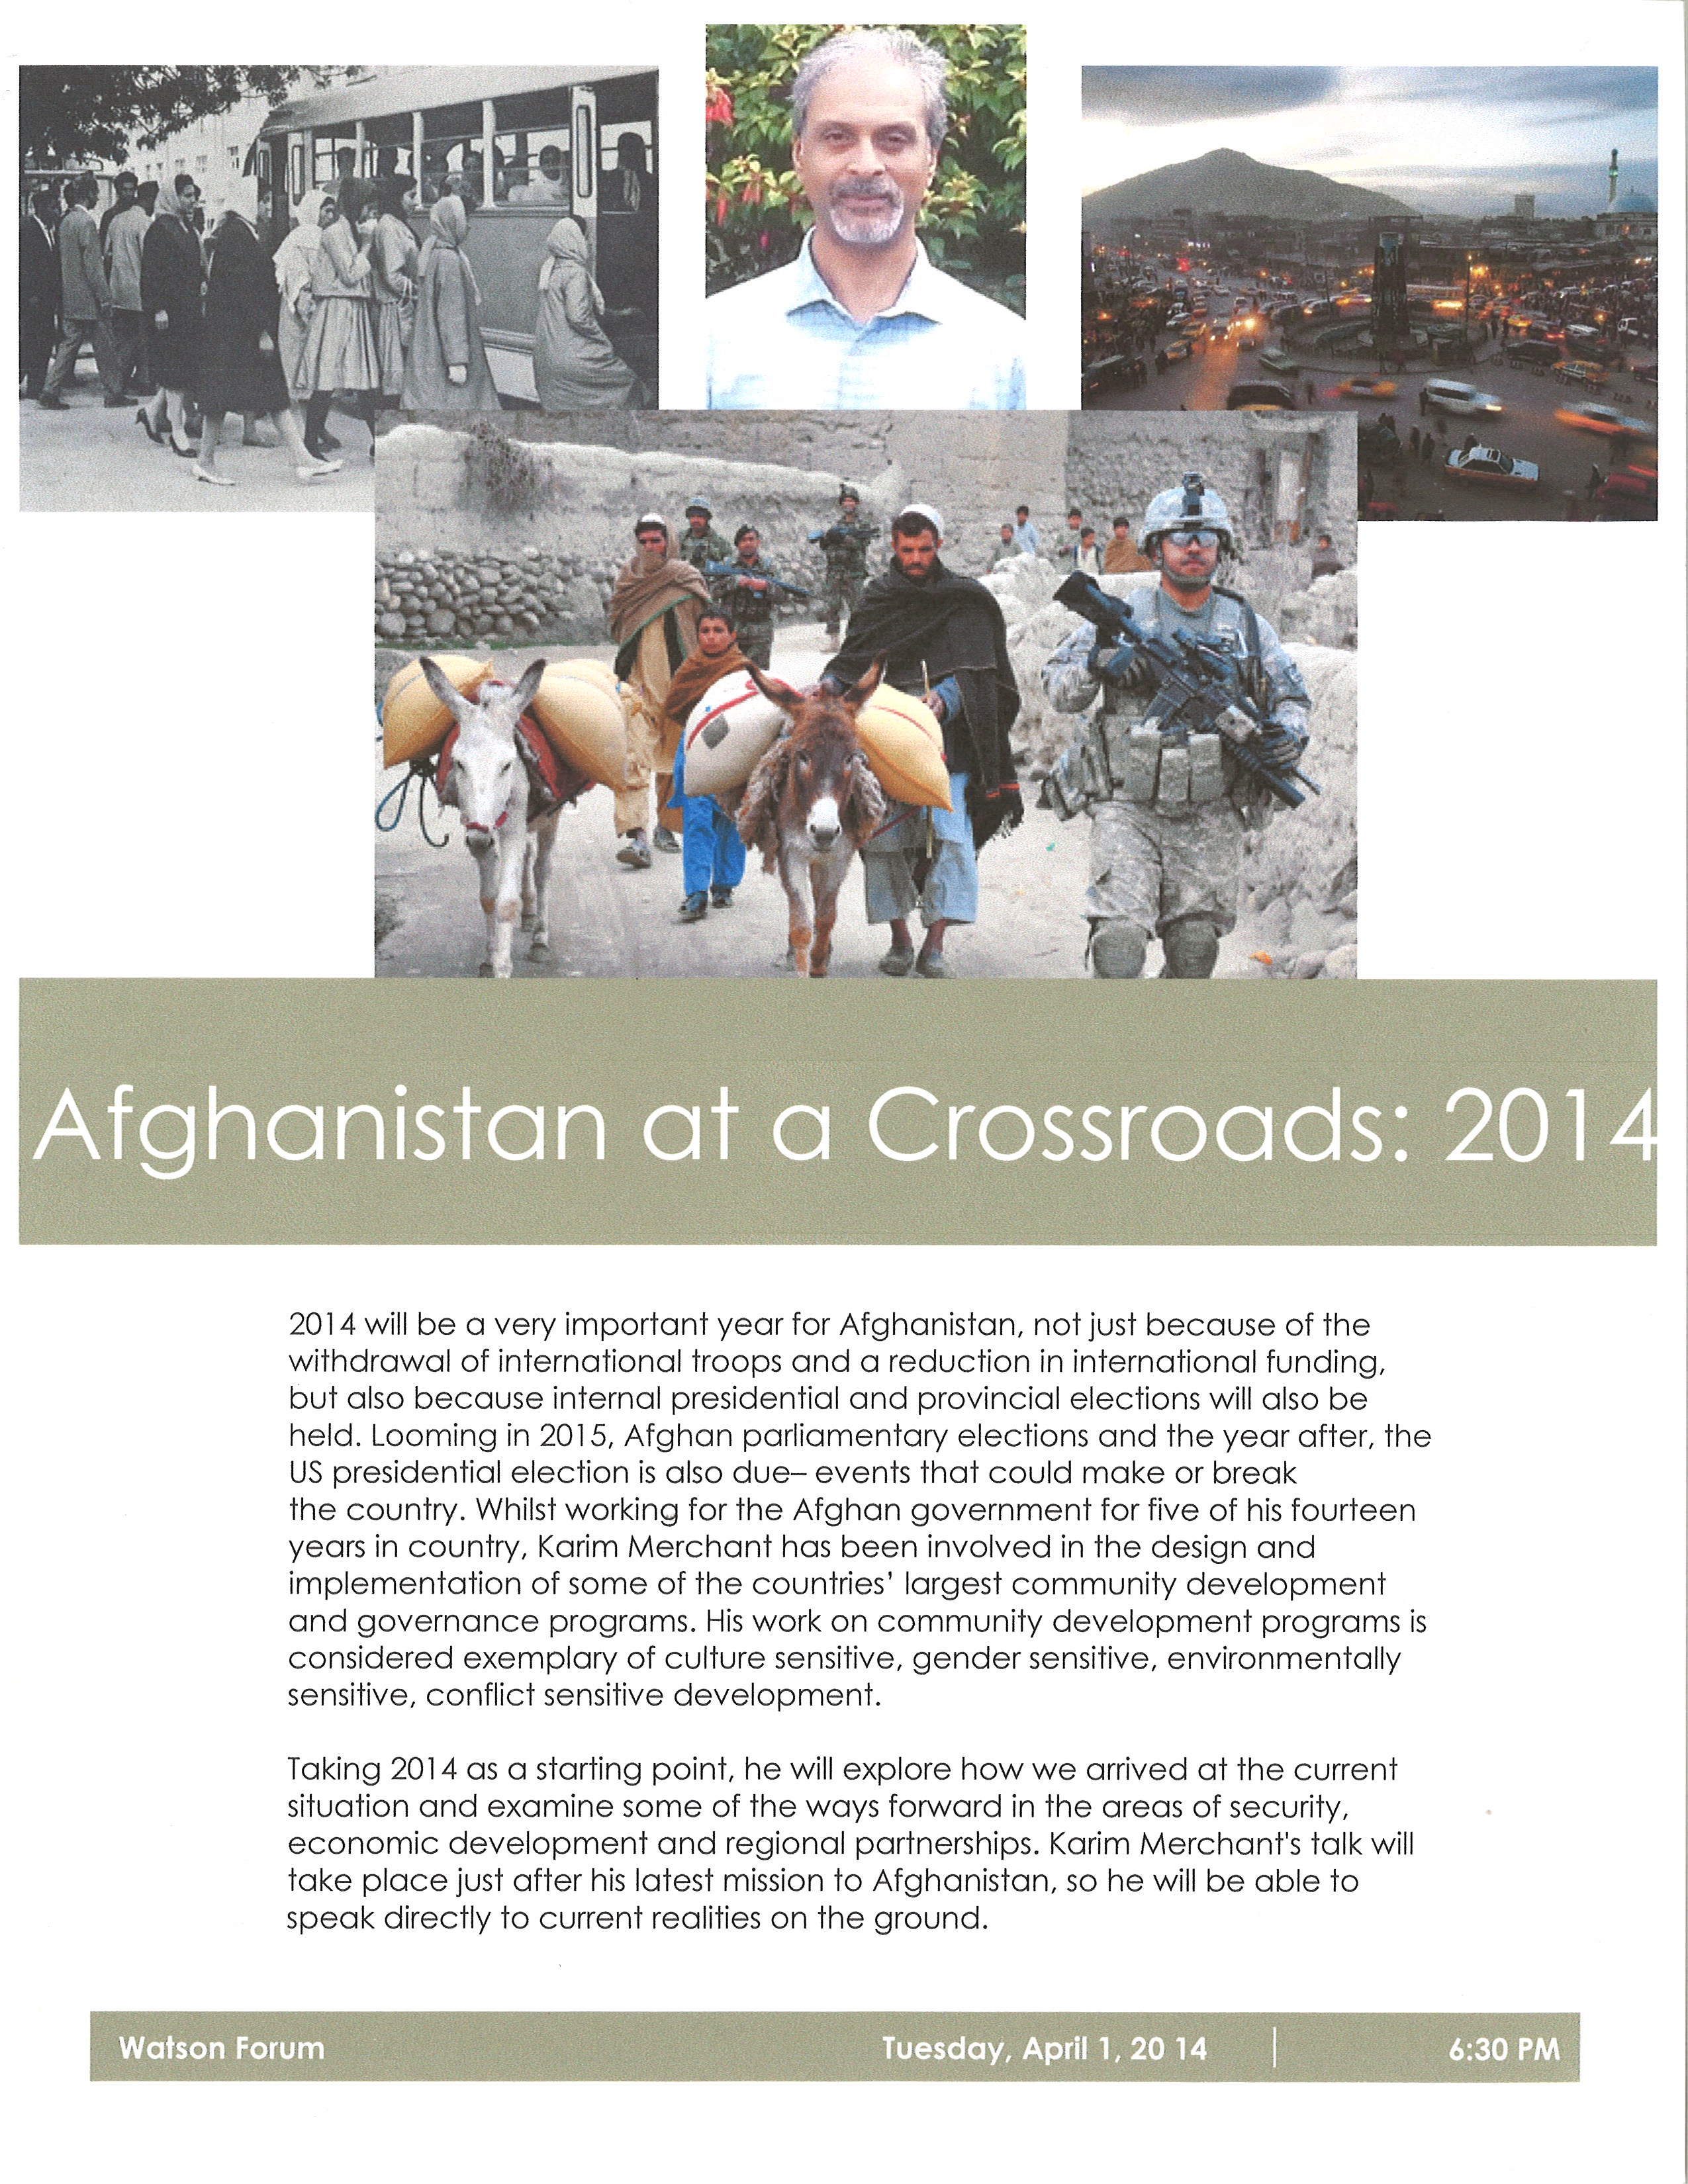 Poster for Afghanistan at a Crossroads: 2014 featuring Kari Merchant